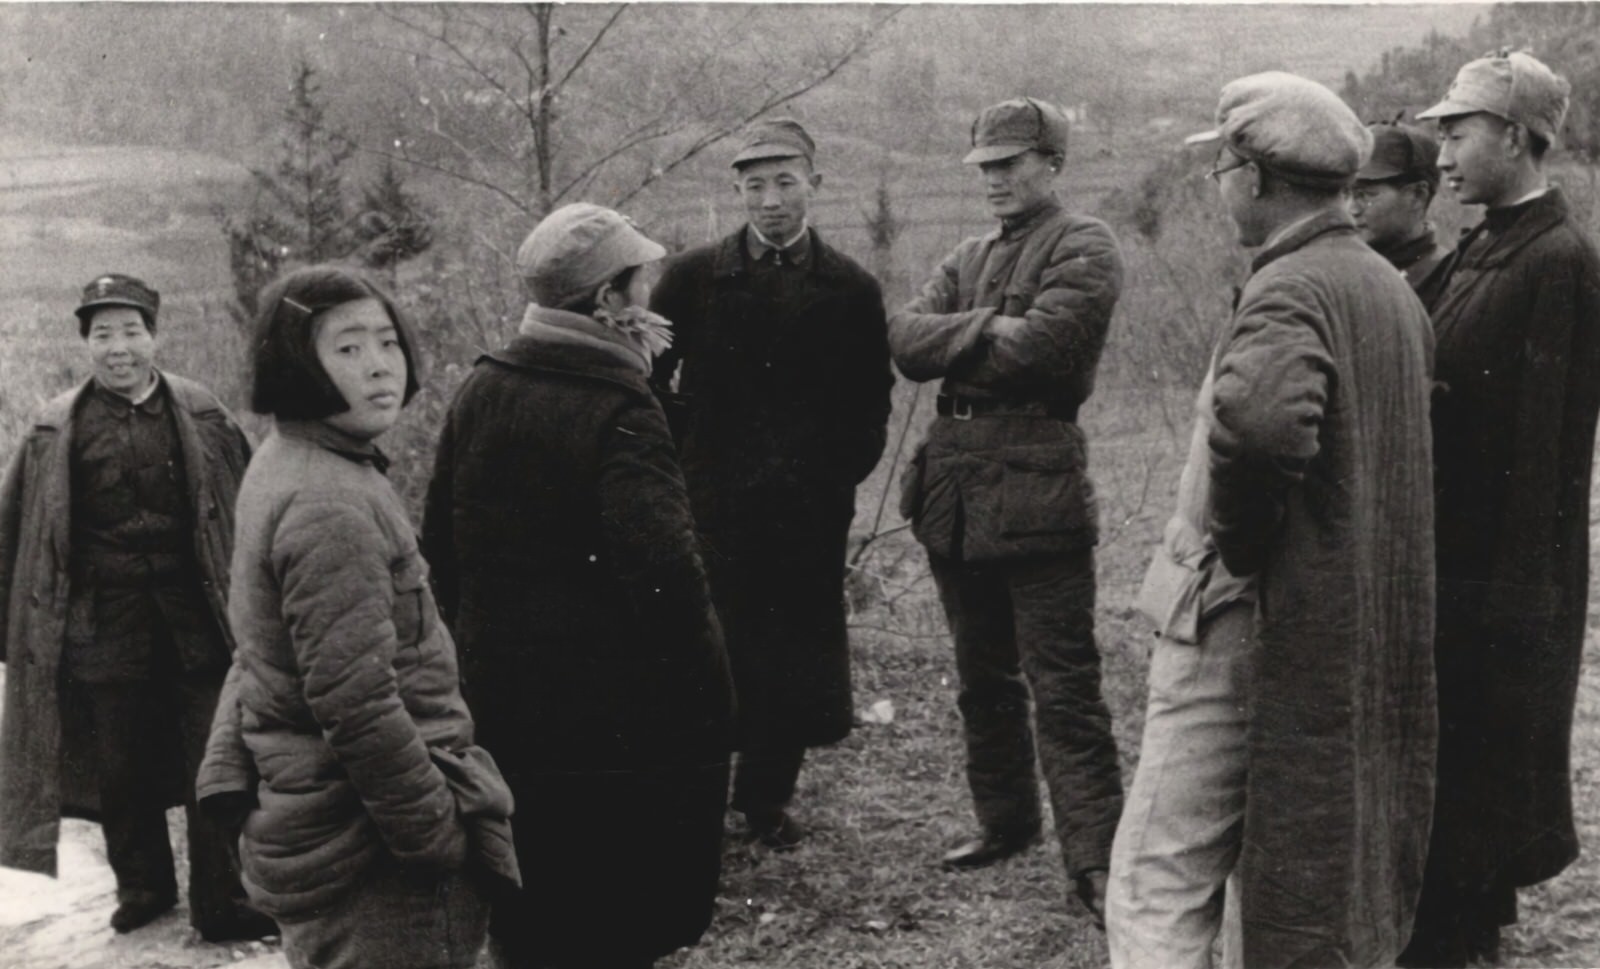 Leaders of the New 4th Army Storm Guerrilla Detachment in the enemy rear, talk with some of my party. To the extreme left is Commander Chen Ta-ji (Chen Taiji), a woman.